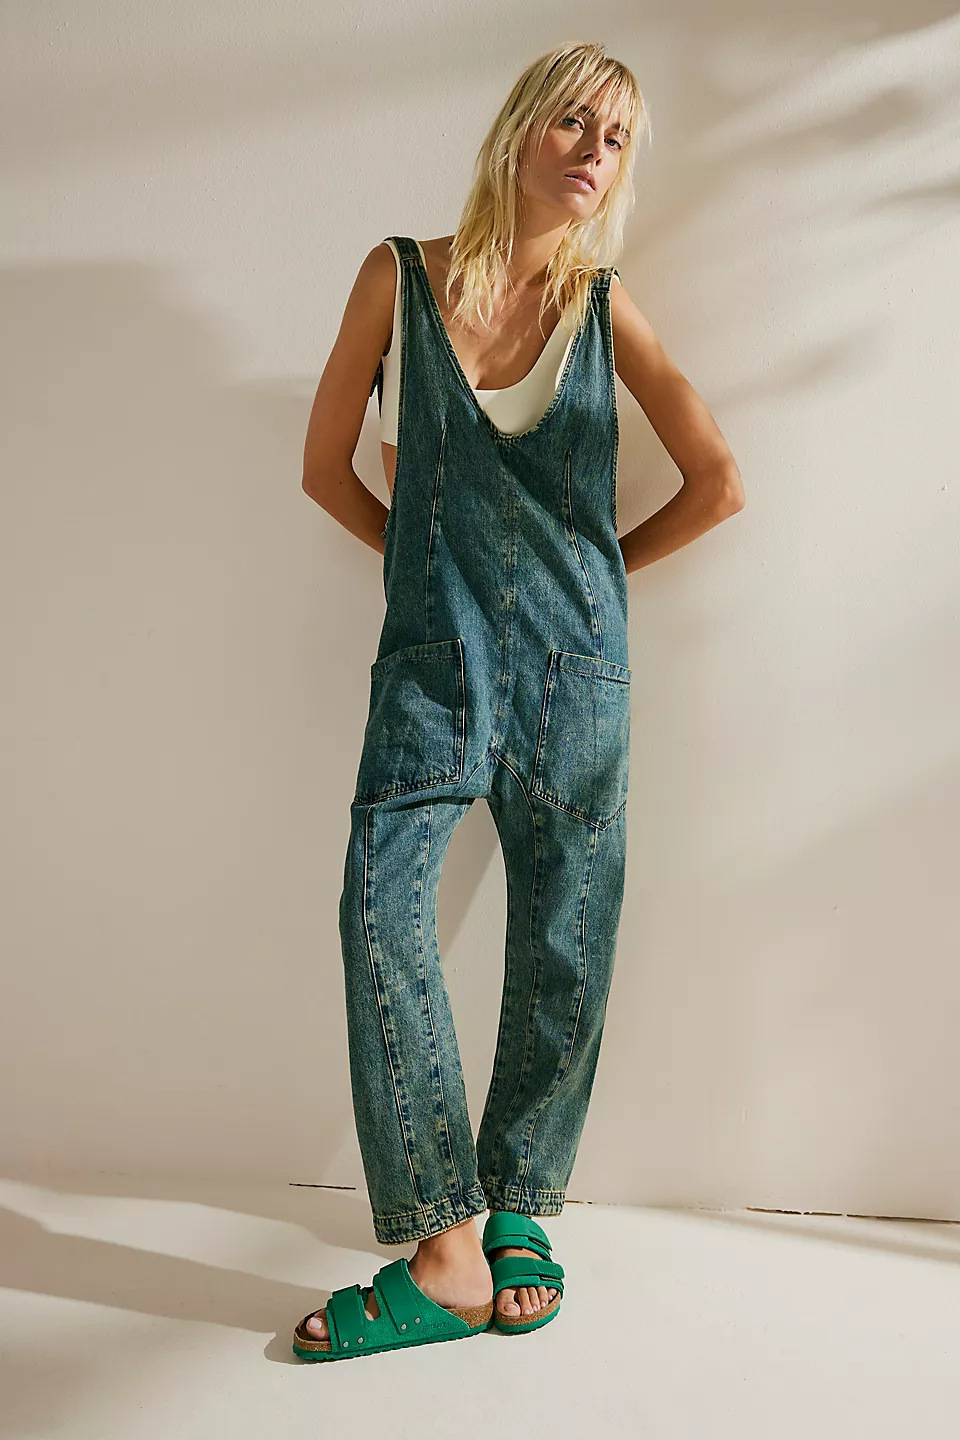 Denim Jumpsuit With Pockets (Buy 2 Free Shipping)